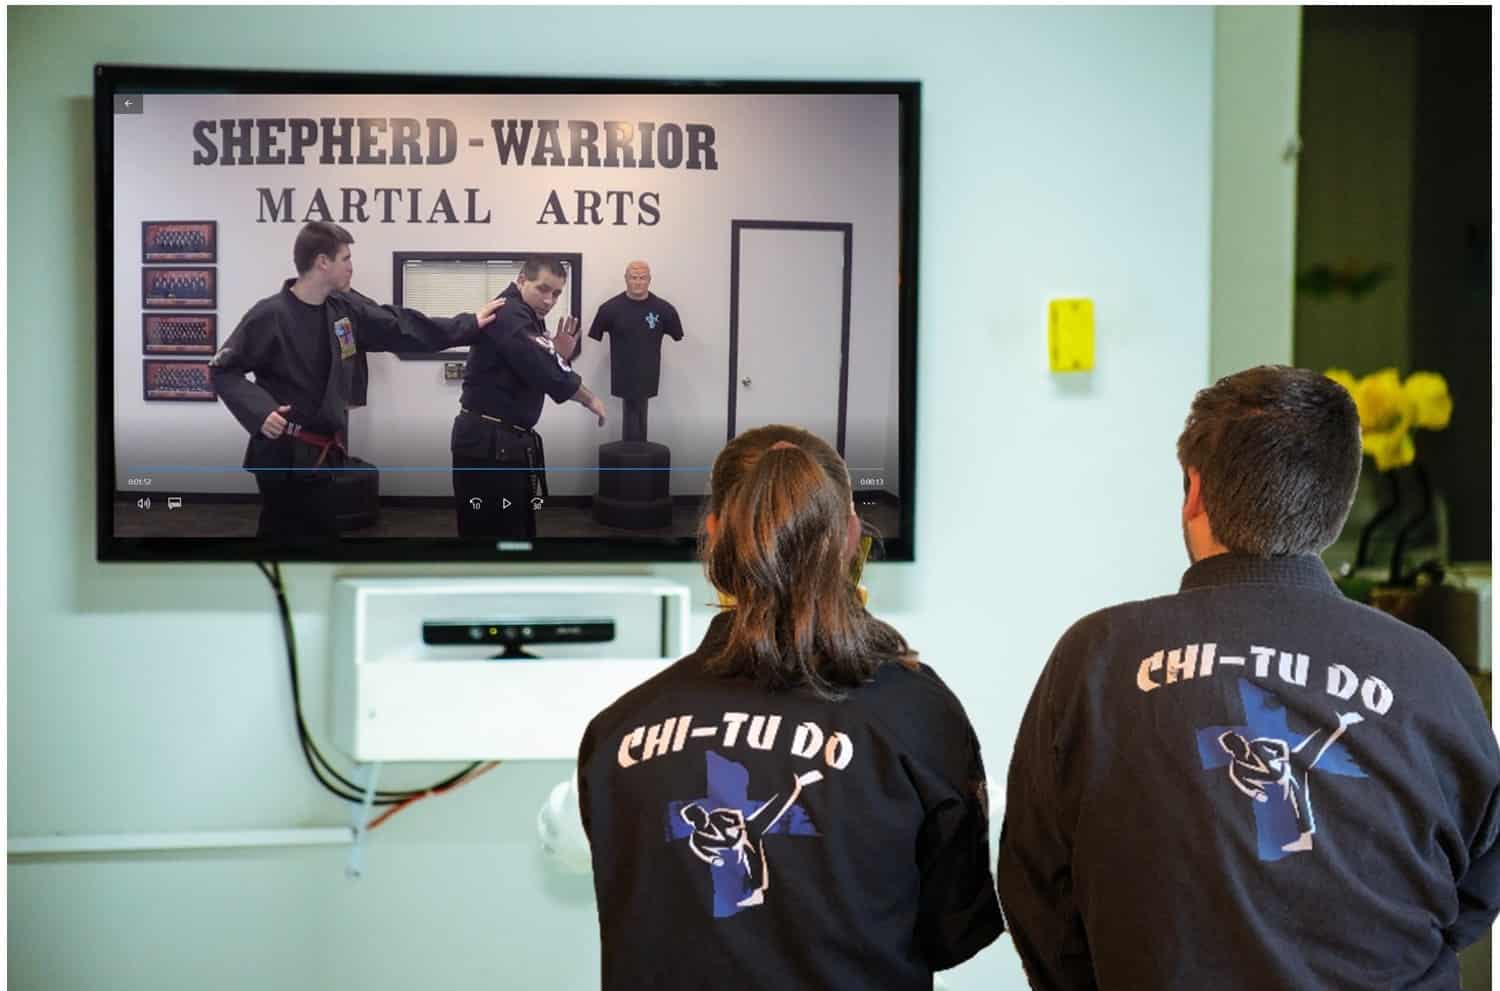 Two students watching online classes at Shepherd-Warrior Martial Arts